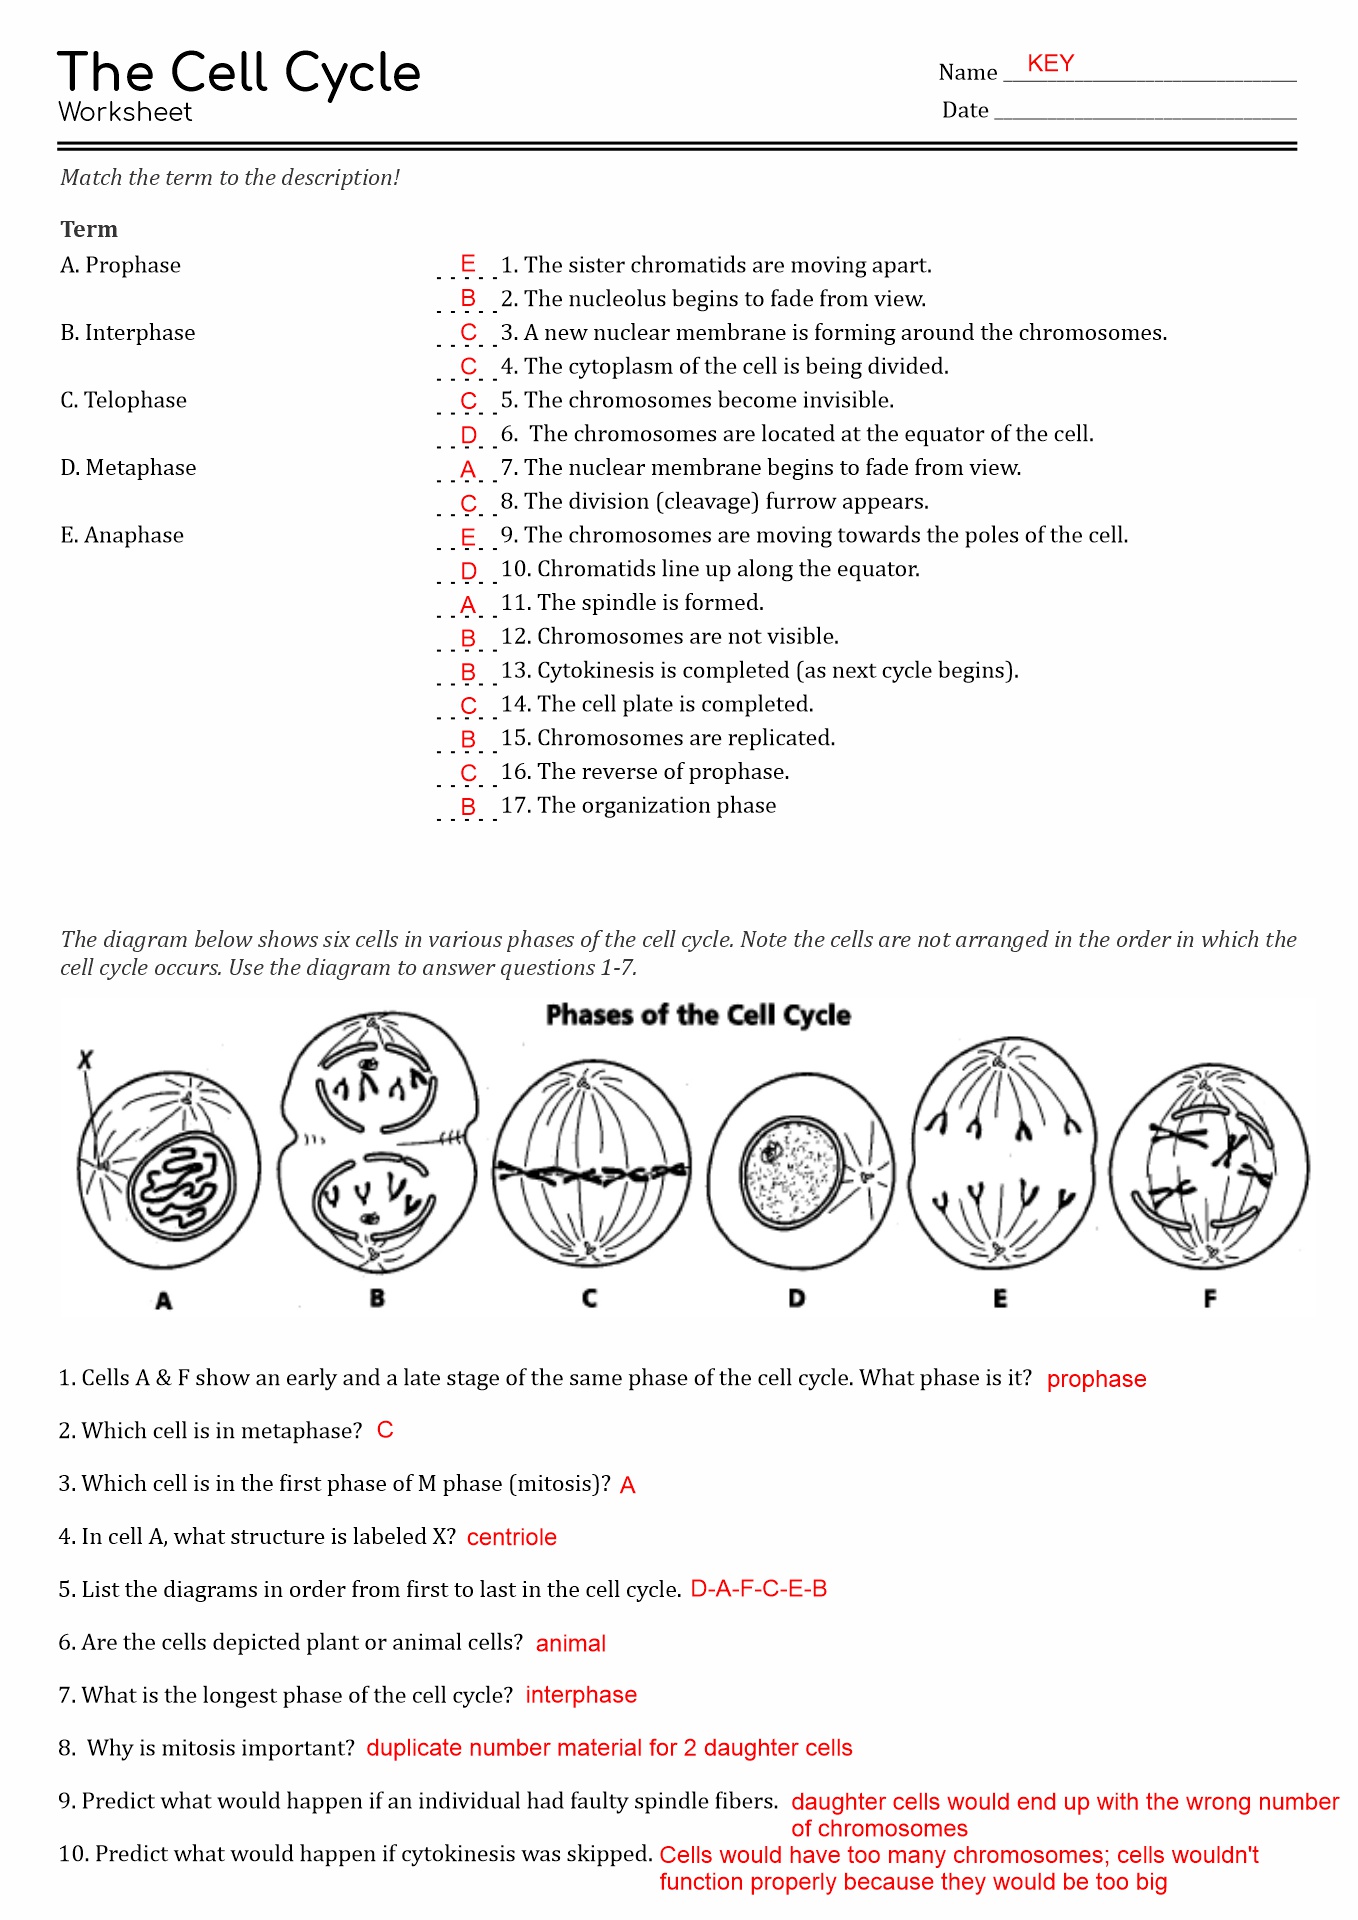 13-best-images-of-the-cell-cycle-worksheet-study-guide-cell-cycle-worksheet-answers-cell